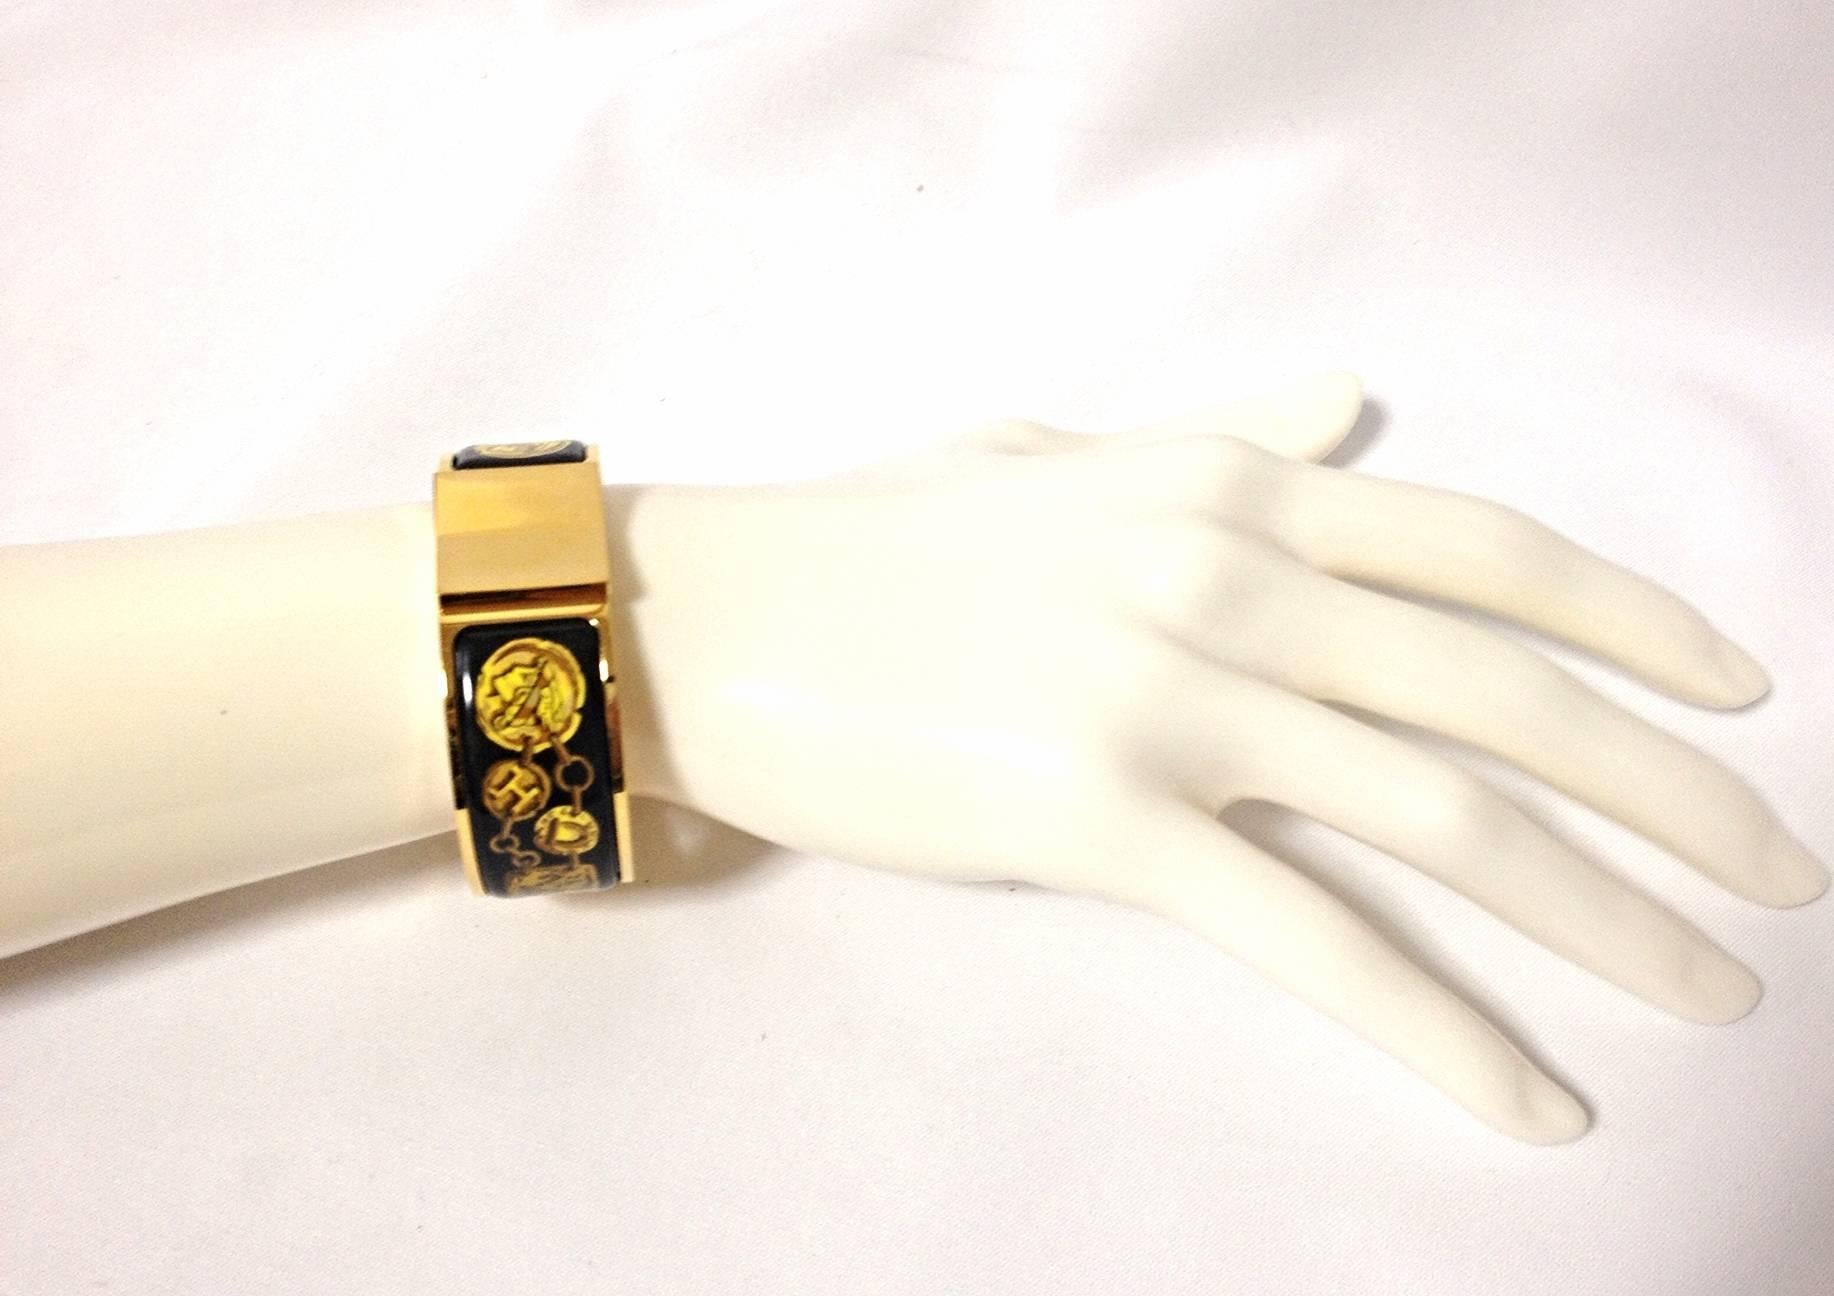 1990s. Vintage Hermes round shape cloisonne enamel golden click and clack Flacon bangle with black, yellow and gold. Great gift idea.

Fabulous bangle in HERMES's iconic cloisonne enamel.
Excellent  beauty and elegance with black, yellow, and